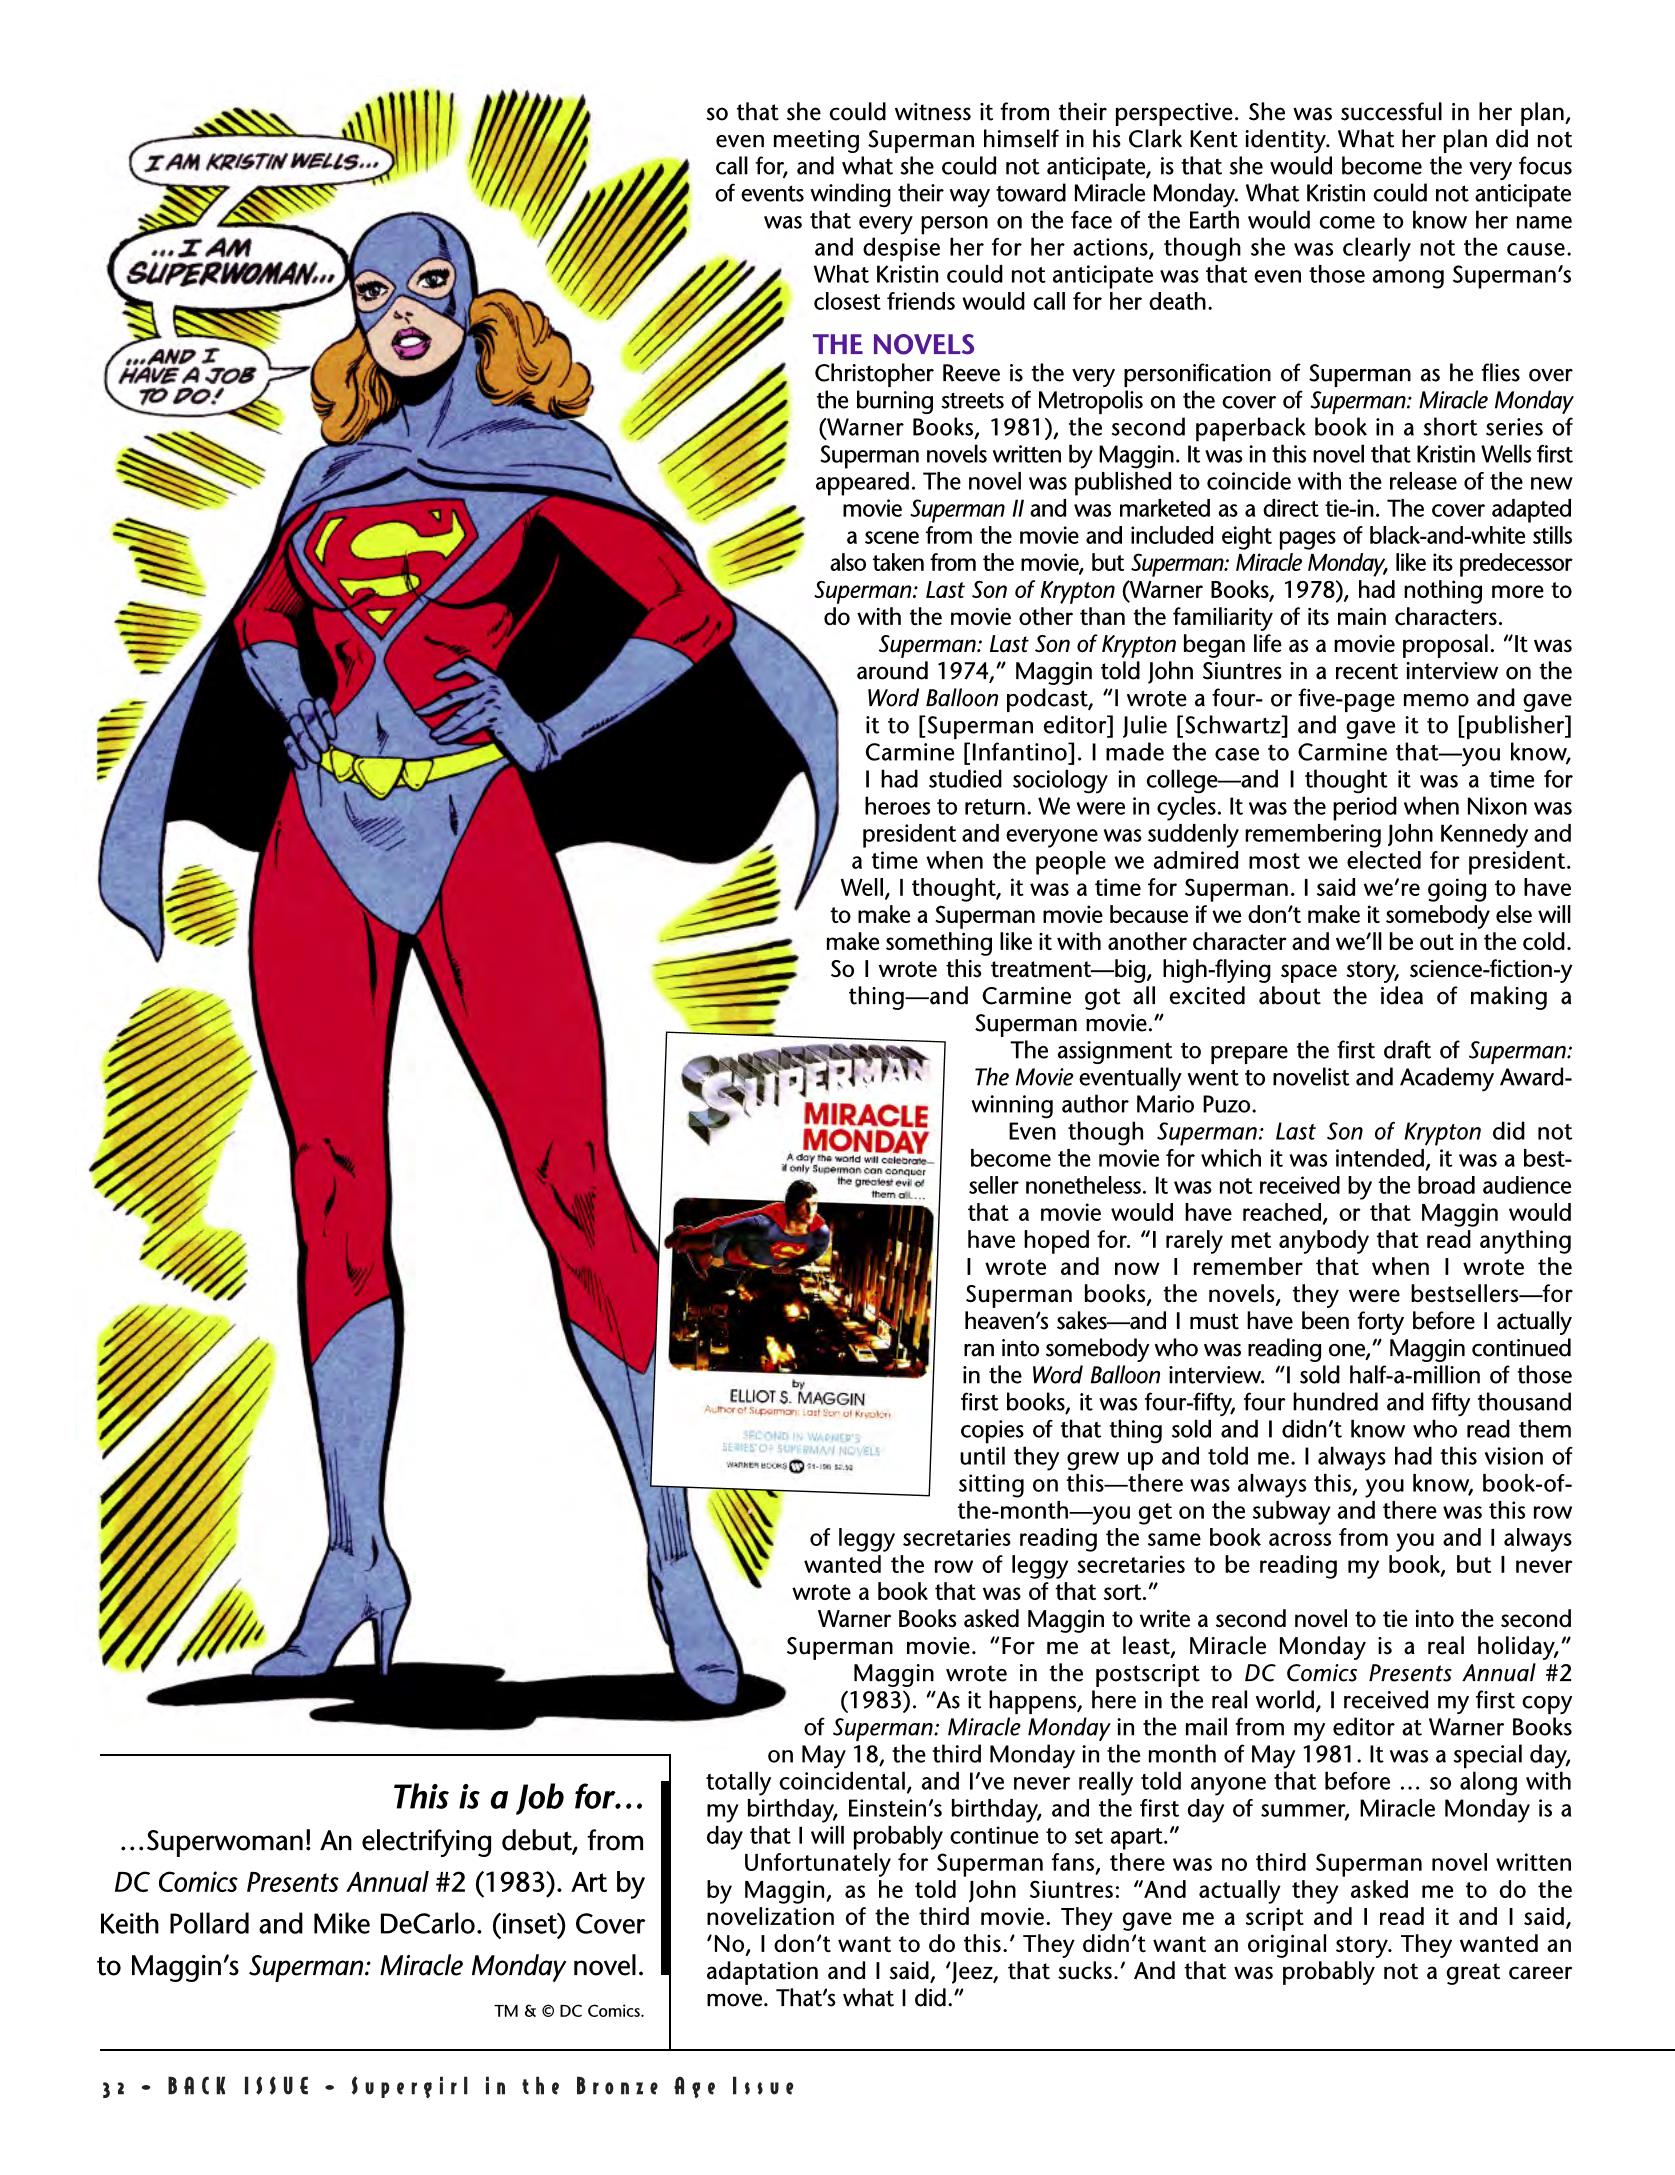 Read online Back Issue comic -  Issue #84 - 28